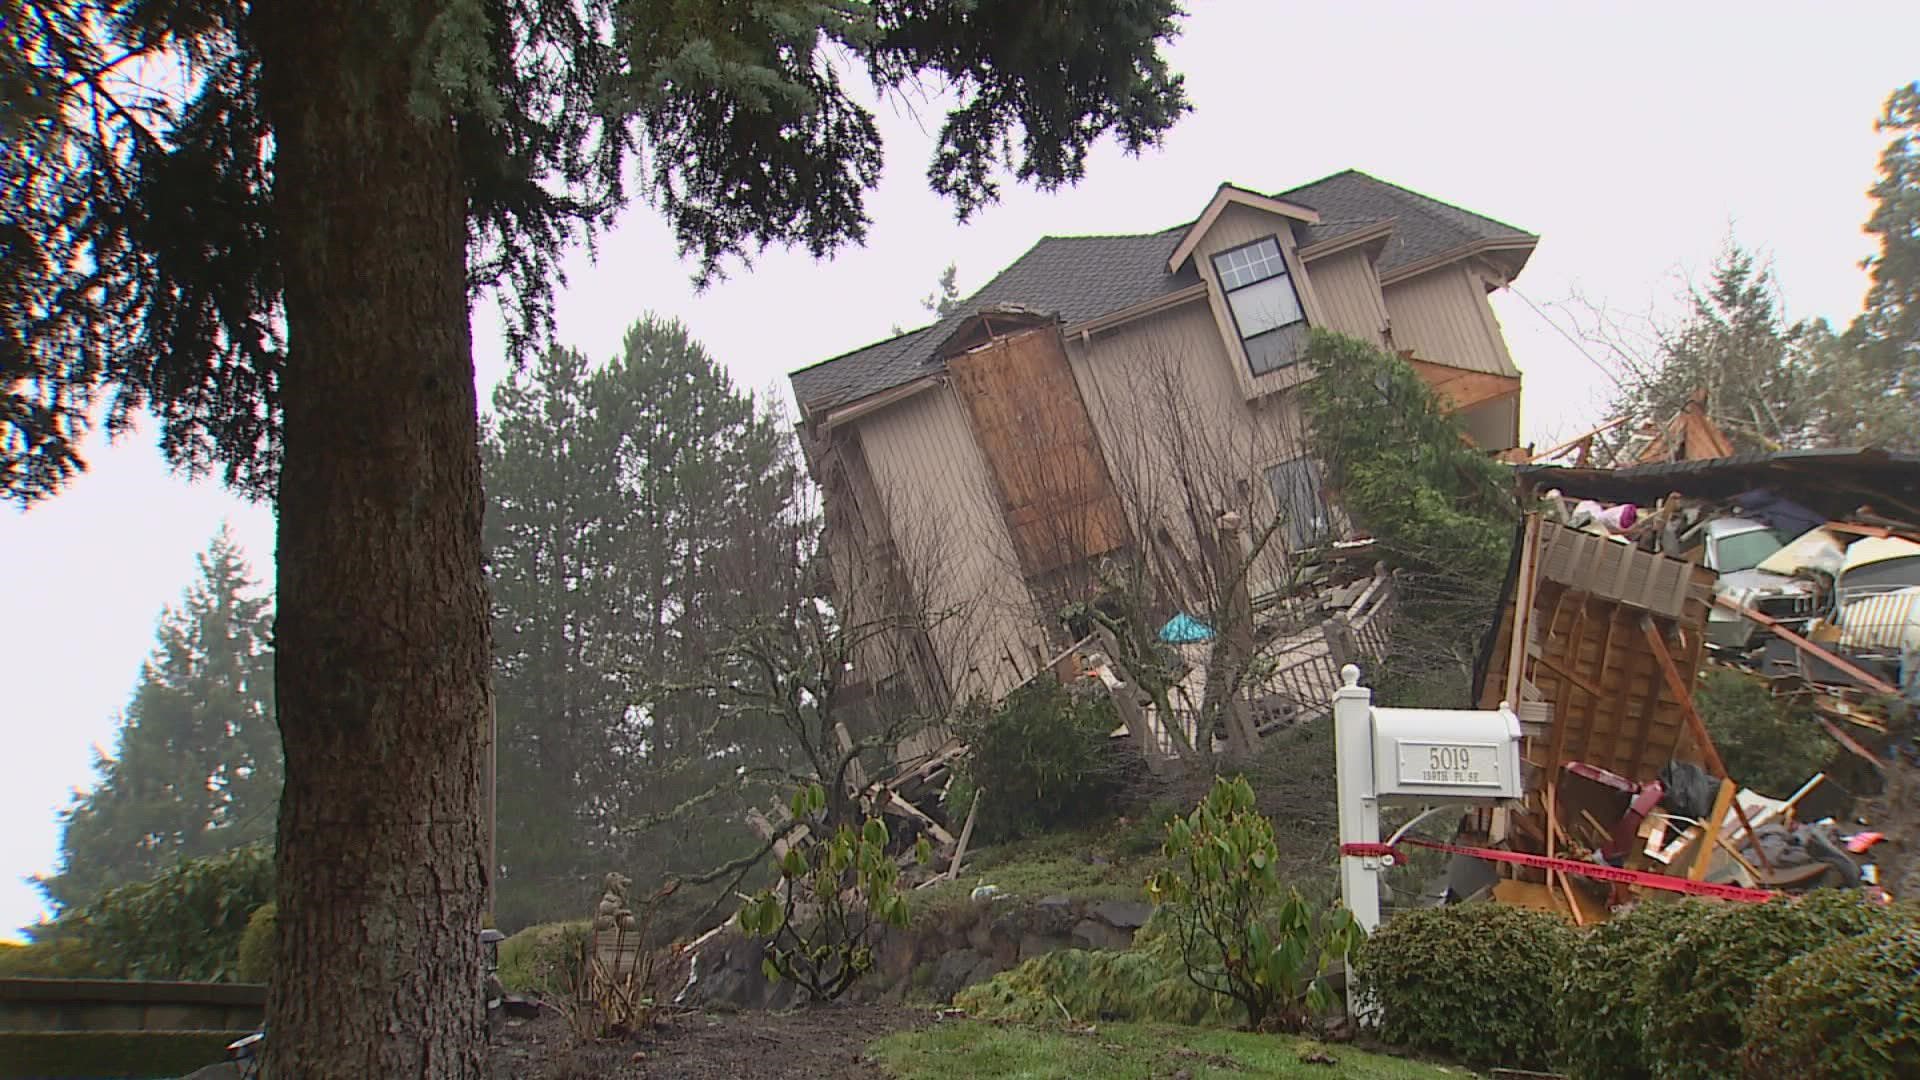 The city said it asked the property owners to allow it to demolish their home, which was damaged in a landslide but hasn’t received the go ahead.